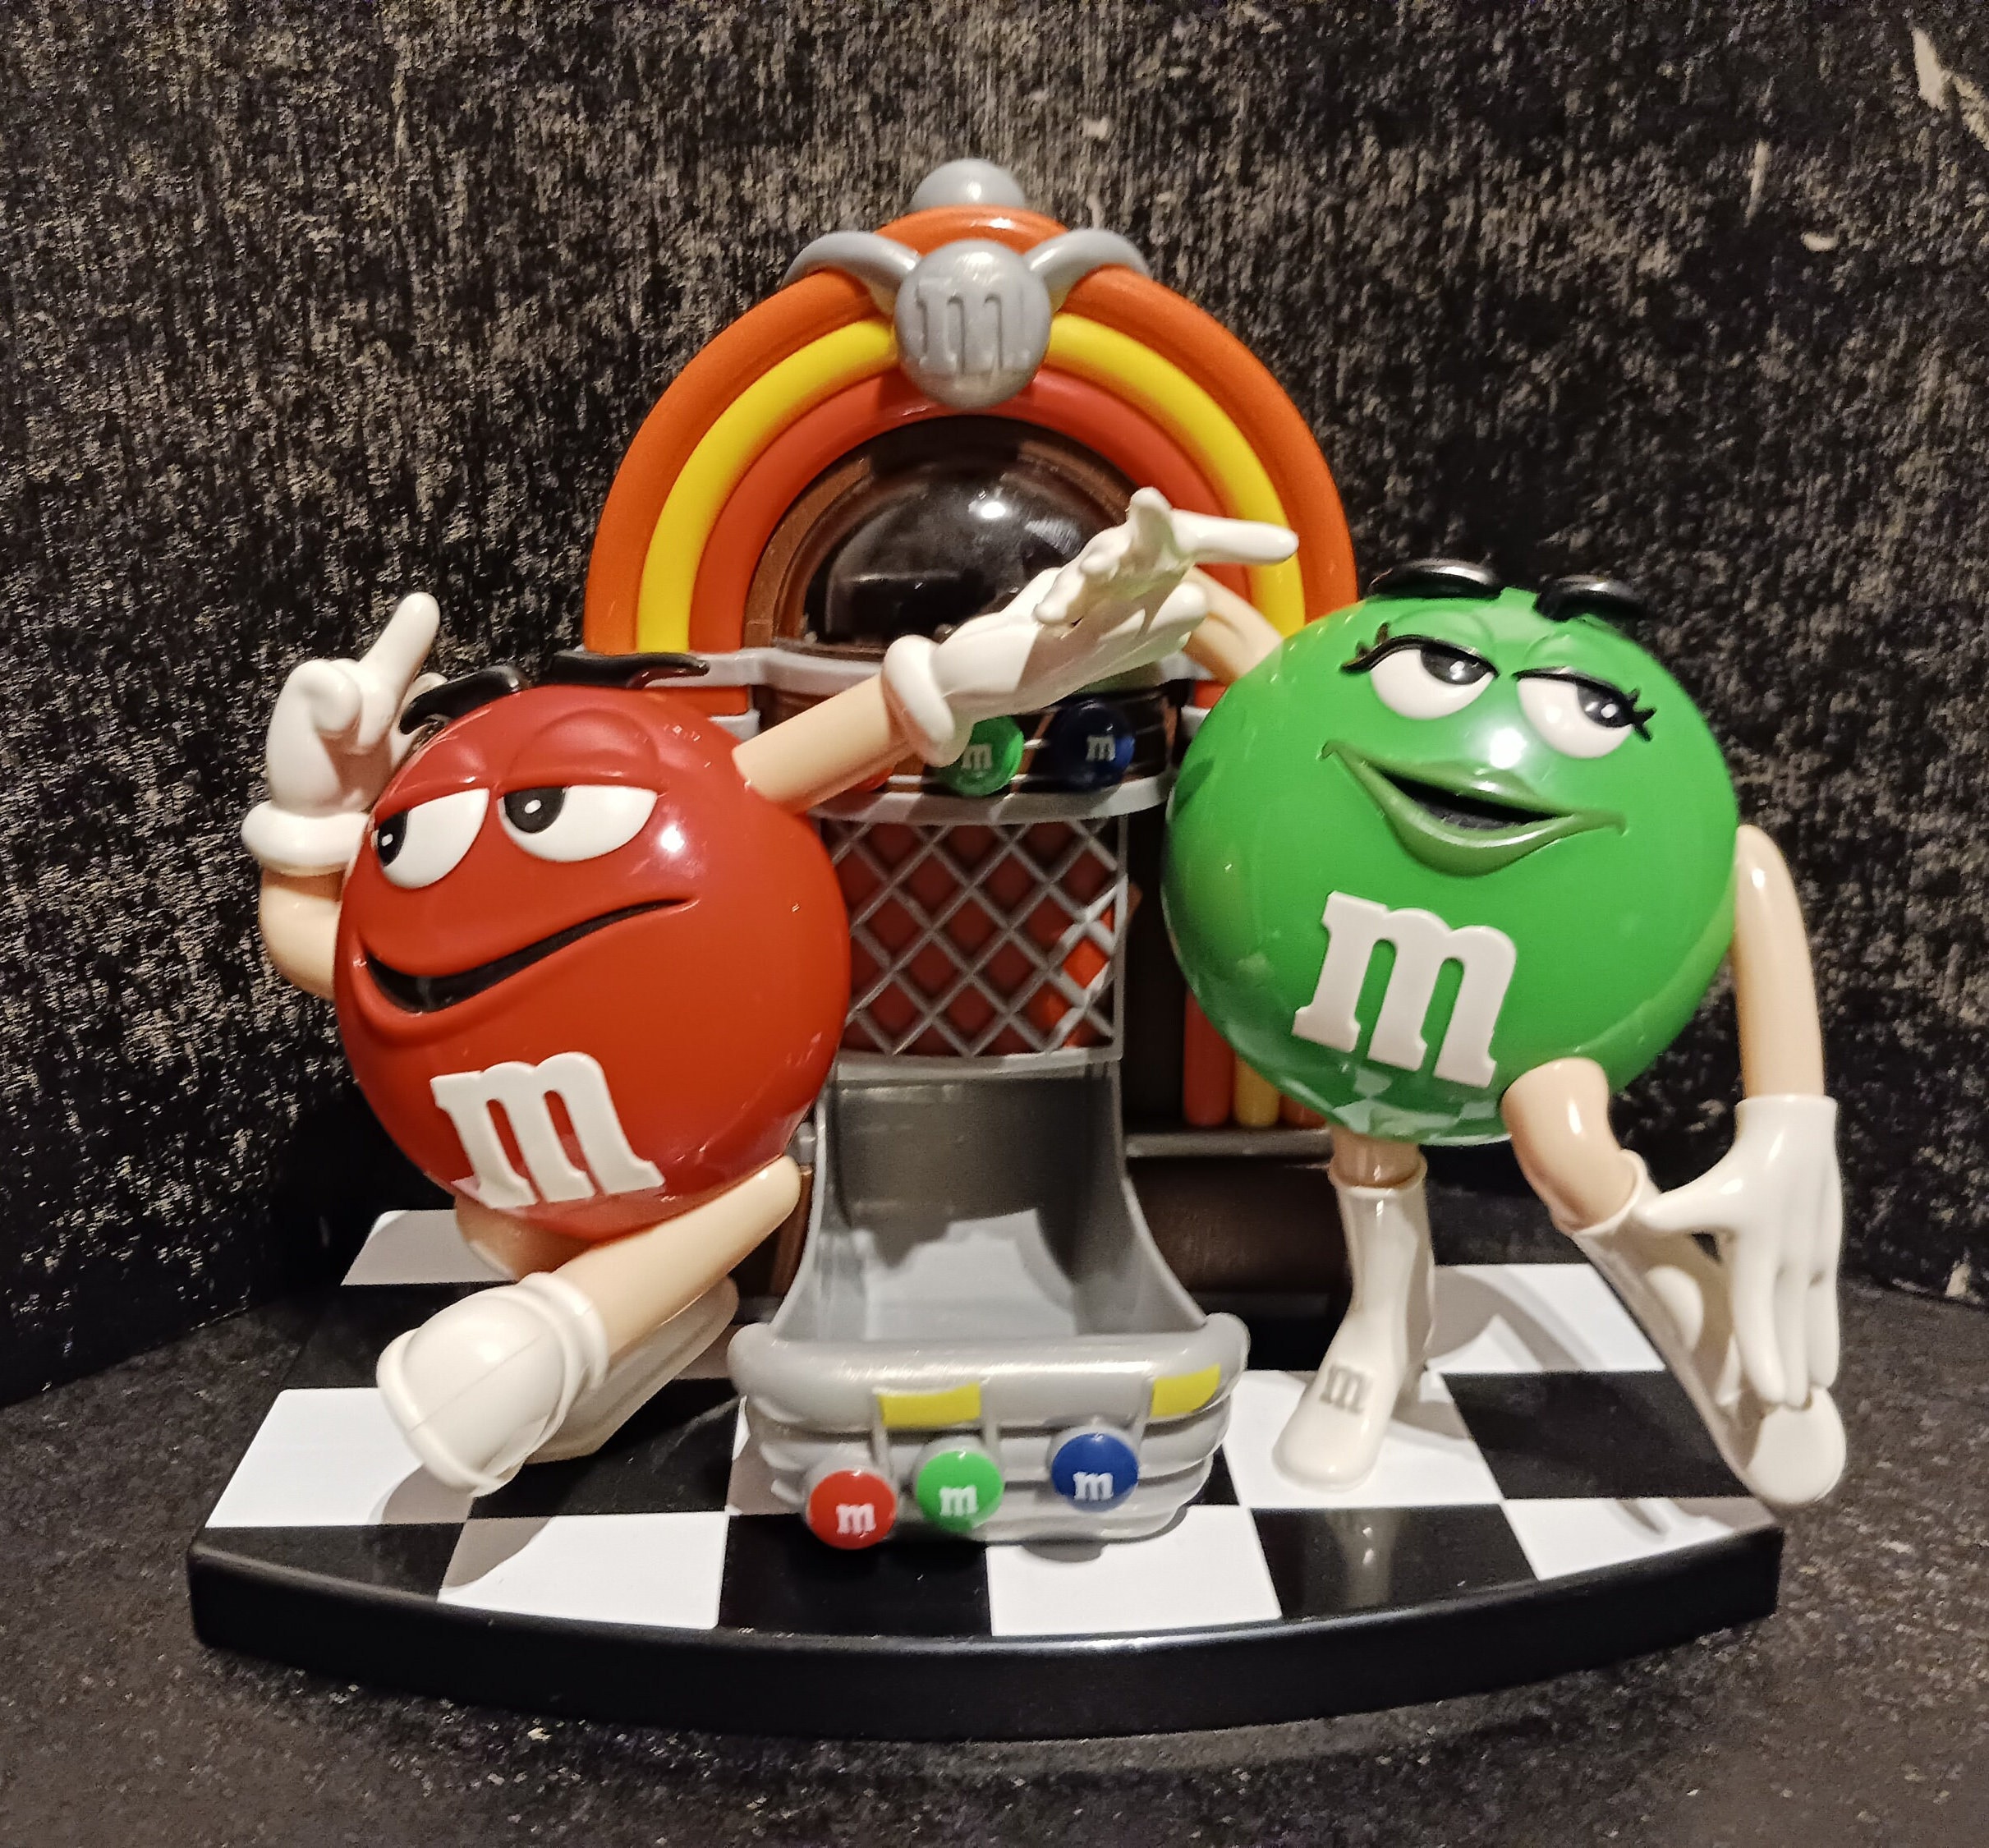  M&ms M&m Candy Dispenser (Loose, No Package) : 2000 Electronic:  Food Dispensers: Home & Kitchen